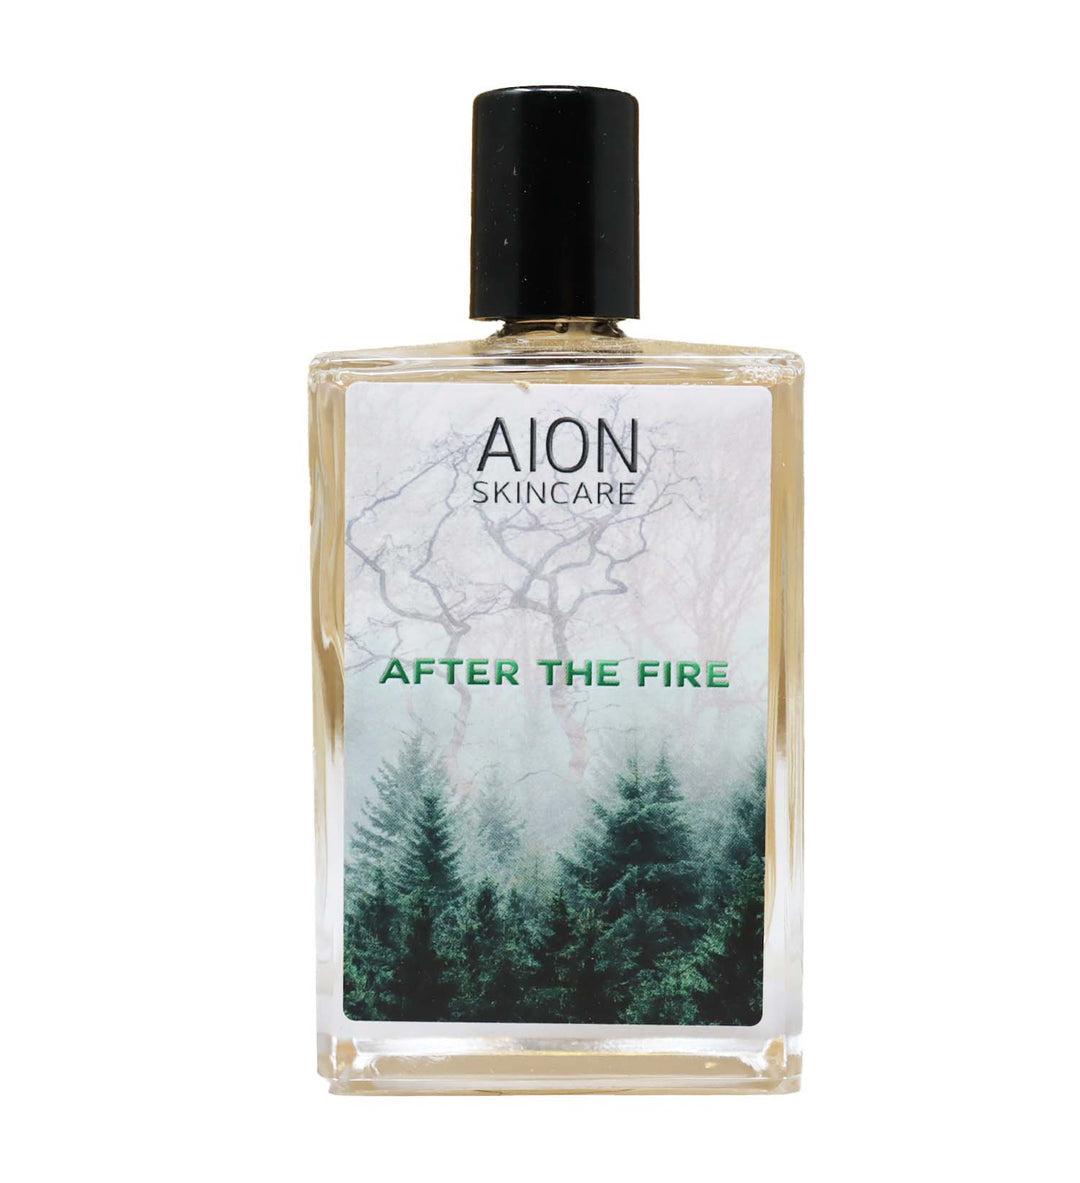 

Aion Skincare After The Fire Alcohol-Free Aftershave Splash 100 ml